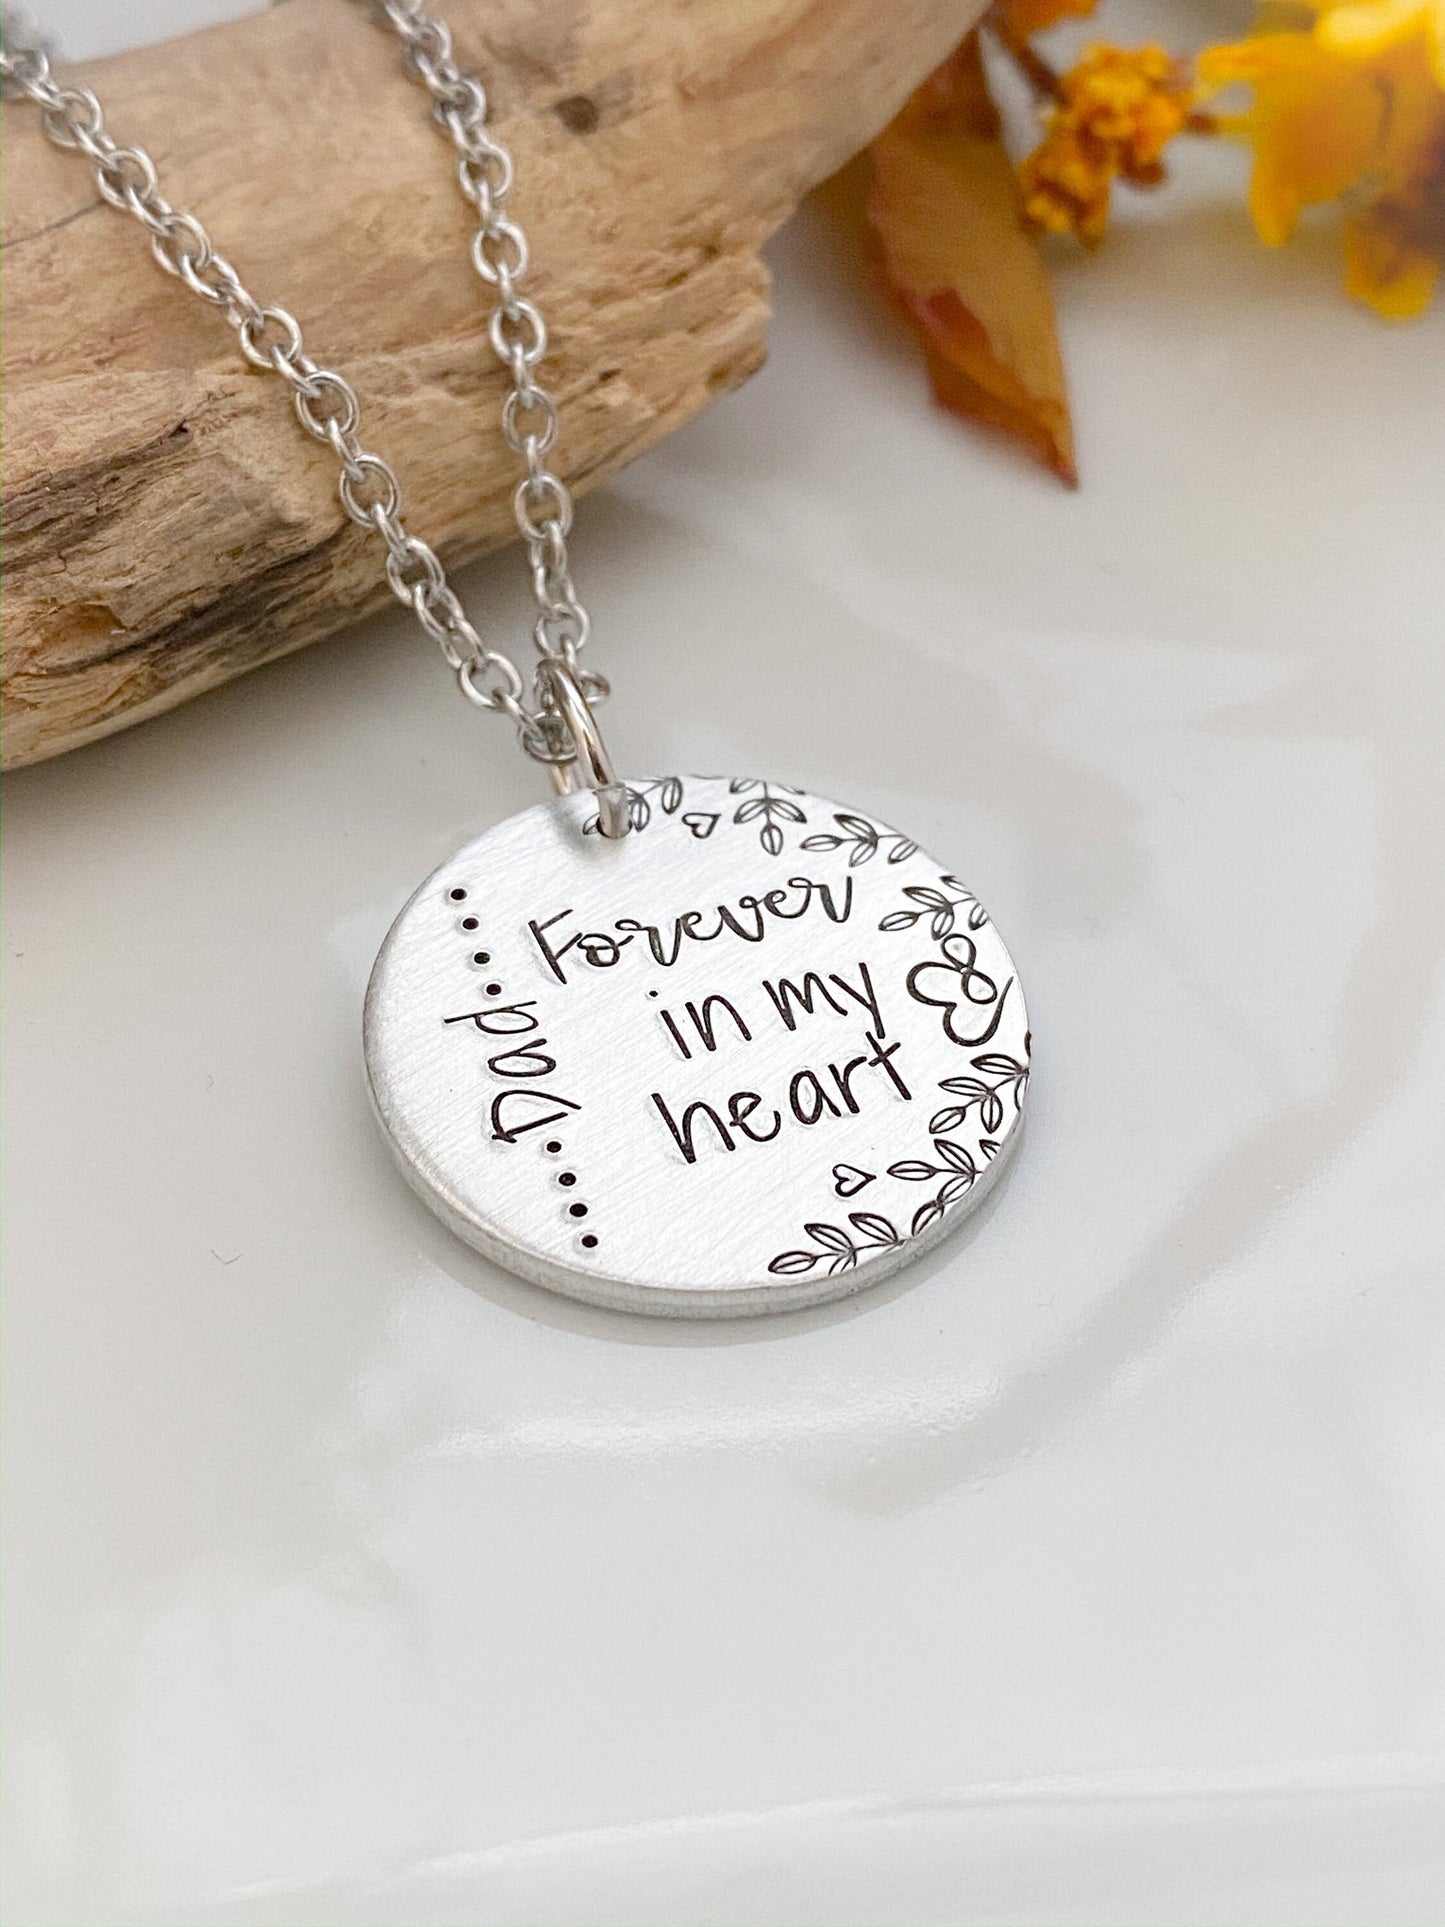 Dad necklace--memorial necklace--remembrance necklace--father memorial jewelry--memorial gift--sympathy gift--loss gift--father memorial